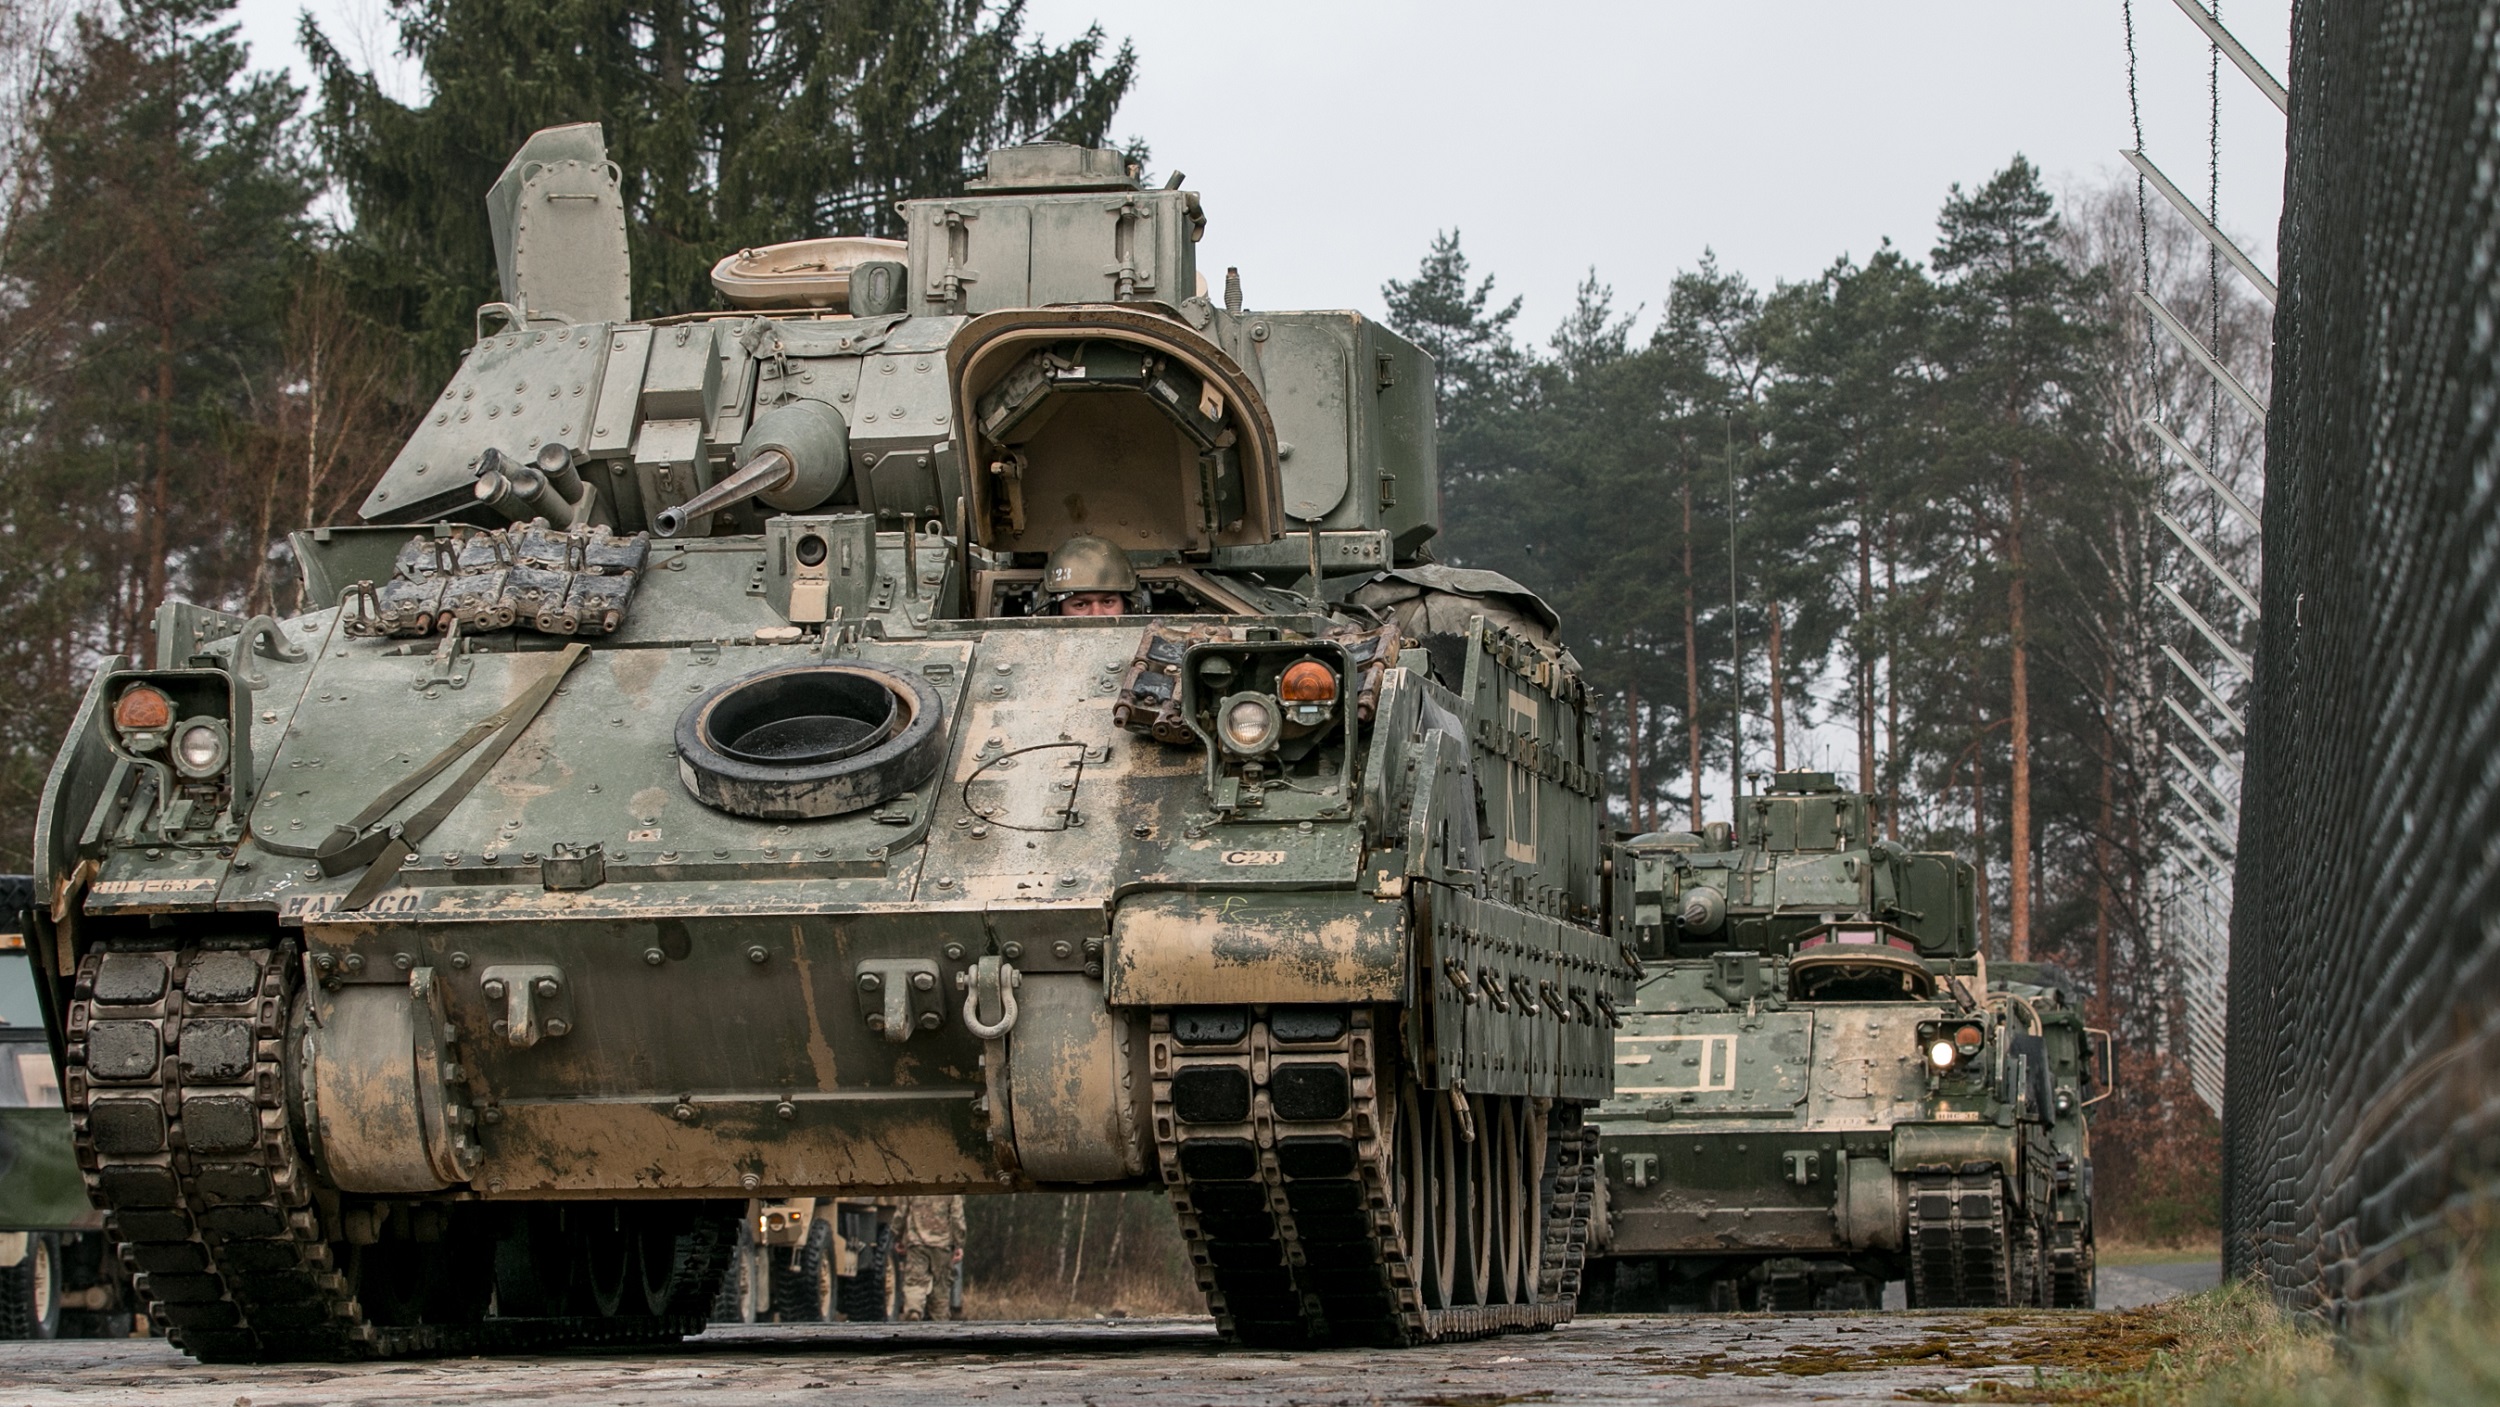 M2 Bradley fighting vehicles are lined up in Grafenwoehr, Germany to be fitted with Multiple Integrated Laser Engagement System (MILES) gear on April 11, 2018, in preparation for a field exercise during Combined Resolve X. Exercise Combined Resolve X is an U.S. Army Europe exercise series held twice a year in the major training areas of southeastern Germany, with this iteration scheduled to take place in April 2018. The Joint Warfighting Assessment leveraged Combined Resolve X, along with the Air Force’s Blue Flag, that were also occurring in Europe. (U.S. Army photo by Spc. Dustin D. Biven / 22nd Mobile Public Affairs Detachment) 